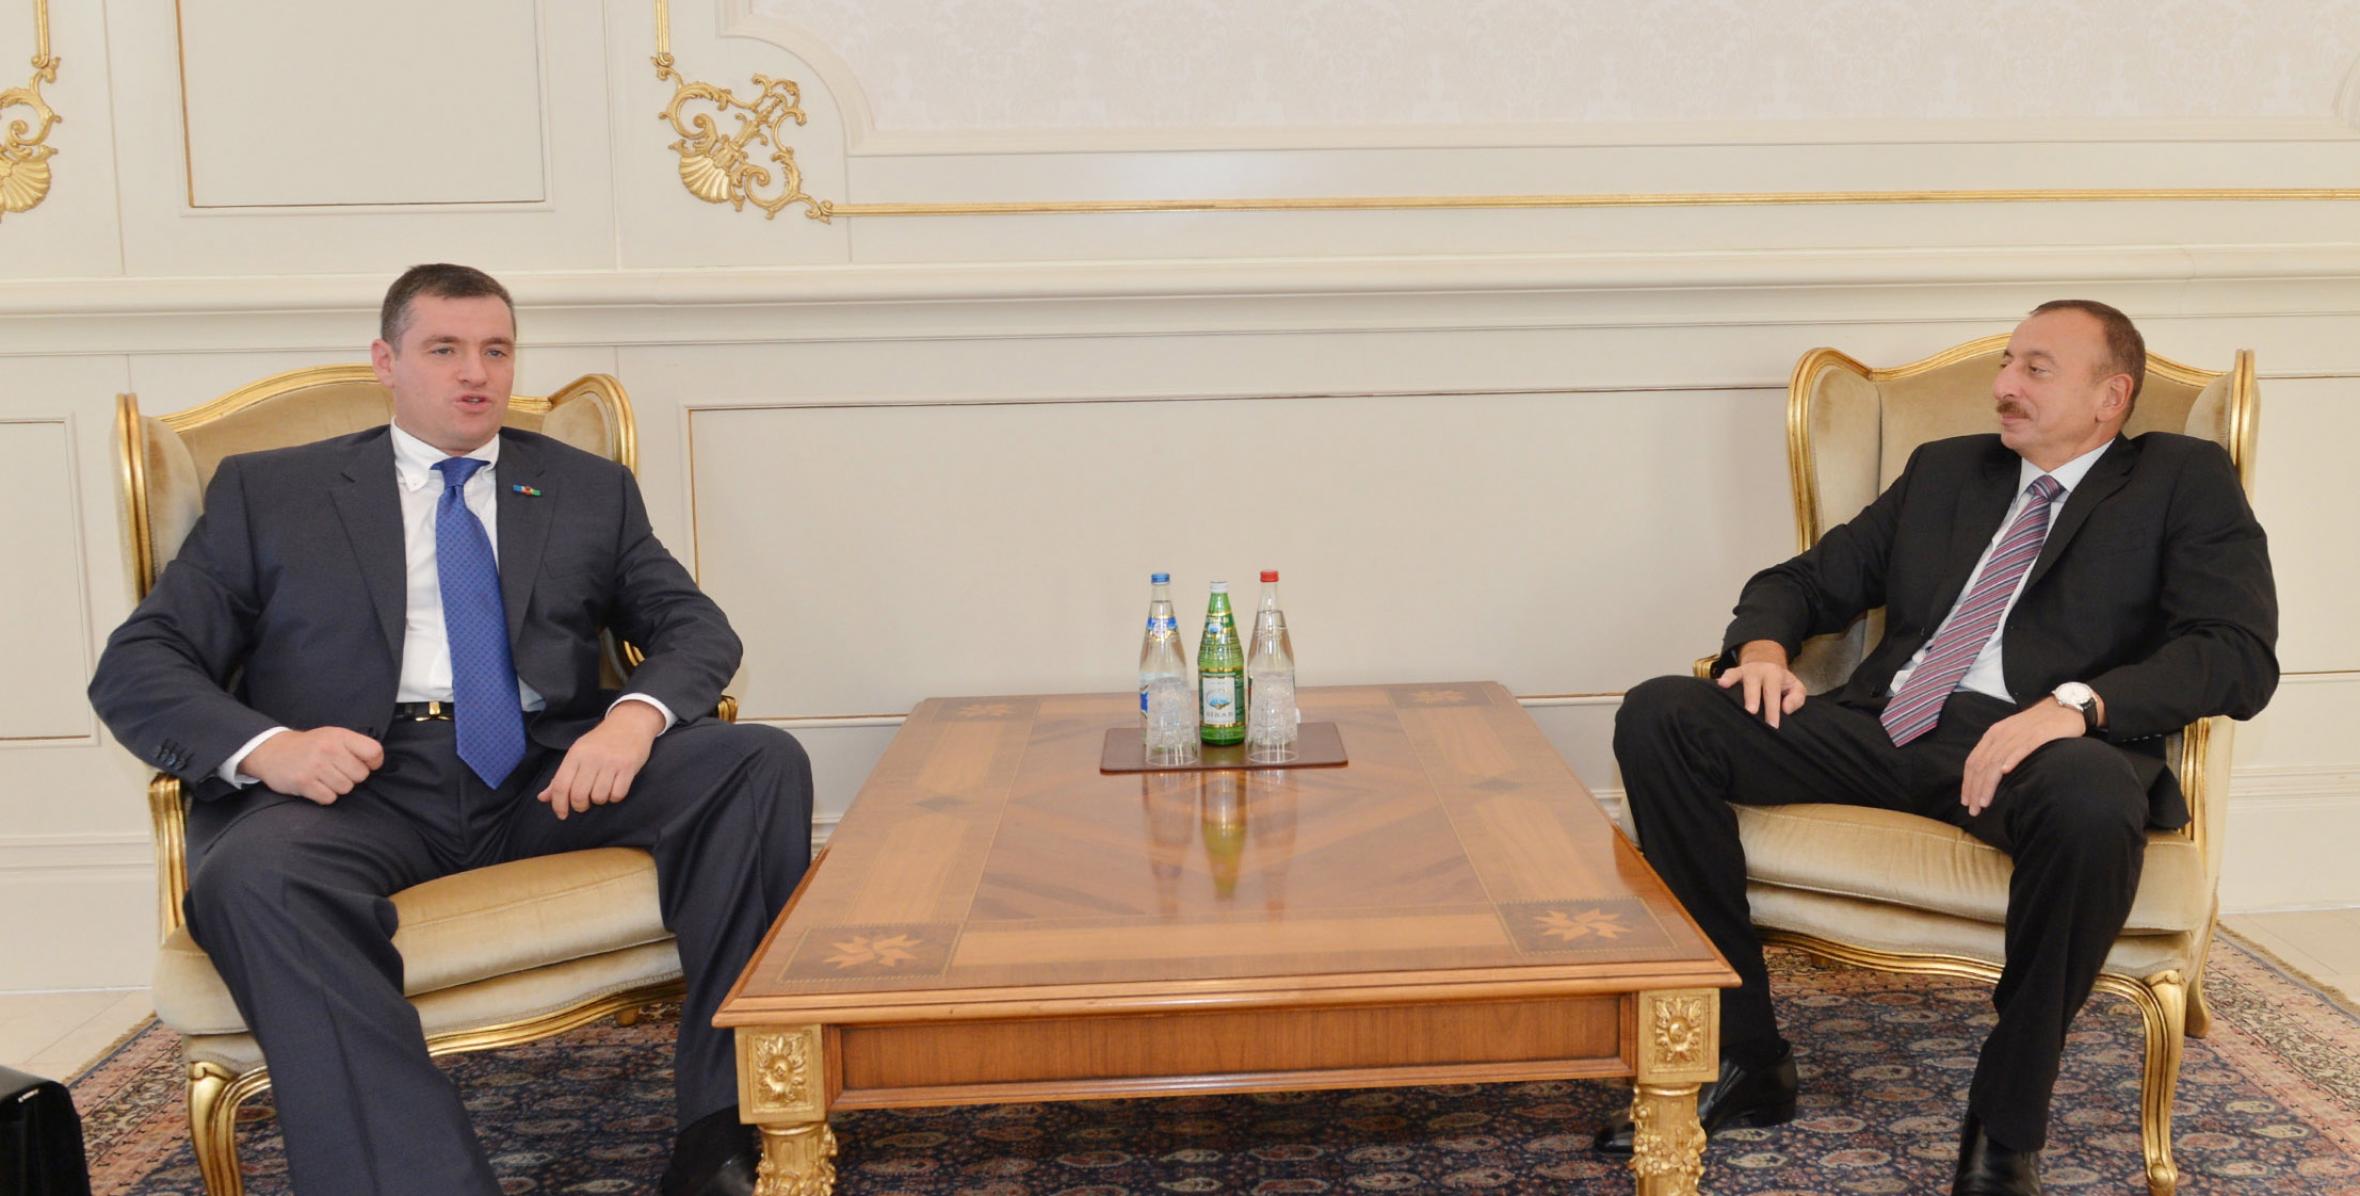 Ilham Aliyev received the head of the CIS mission to observe presidential elections in Azerbaijan, Leonid Slutskiy